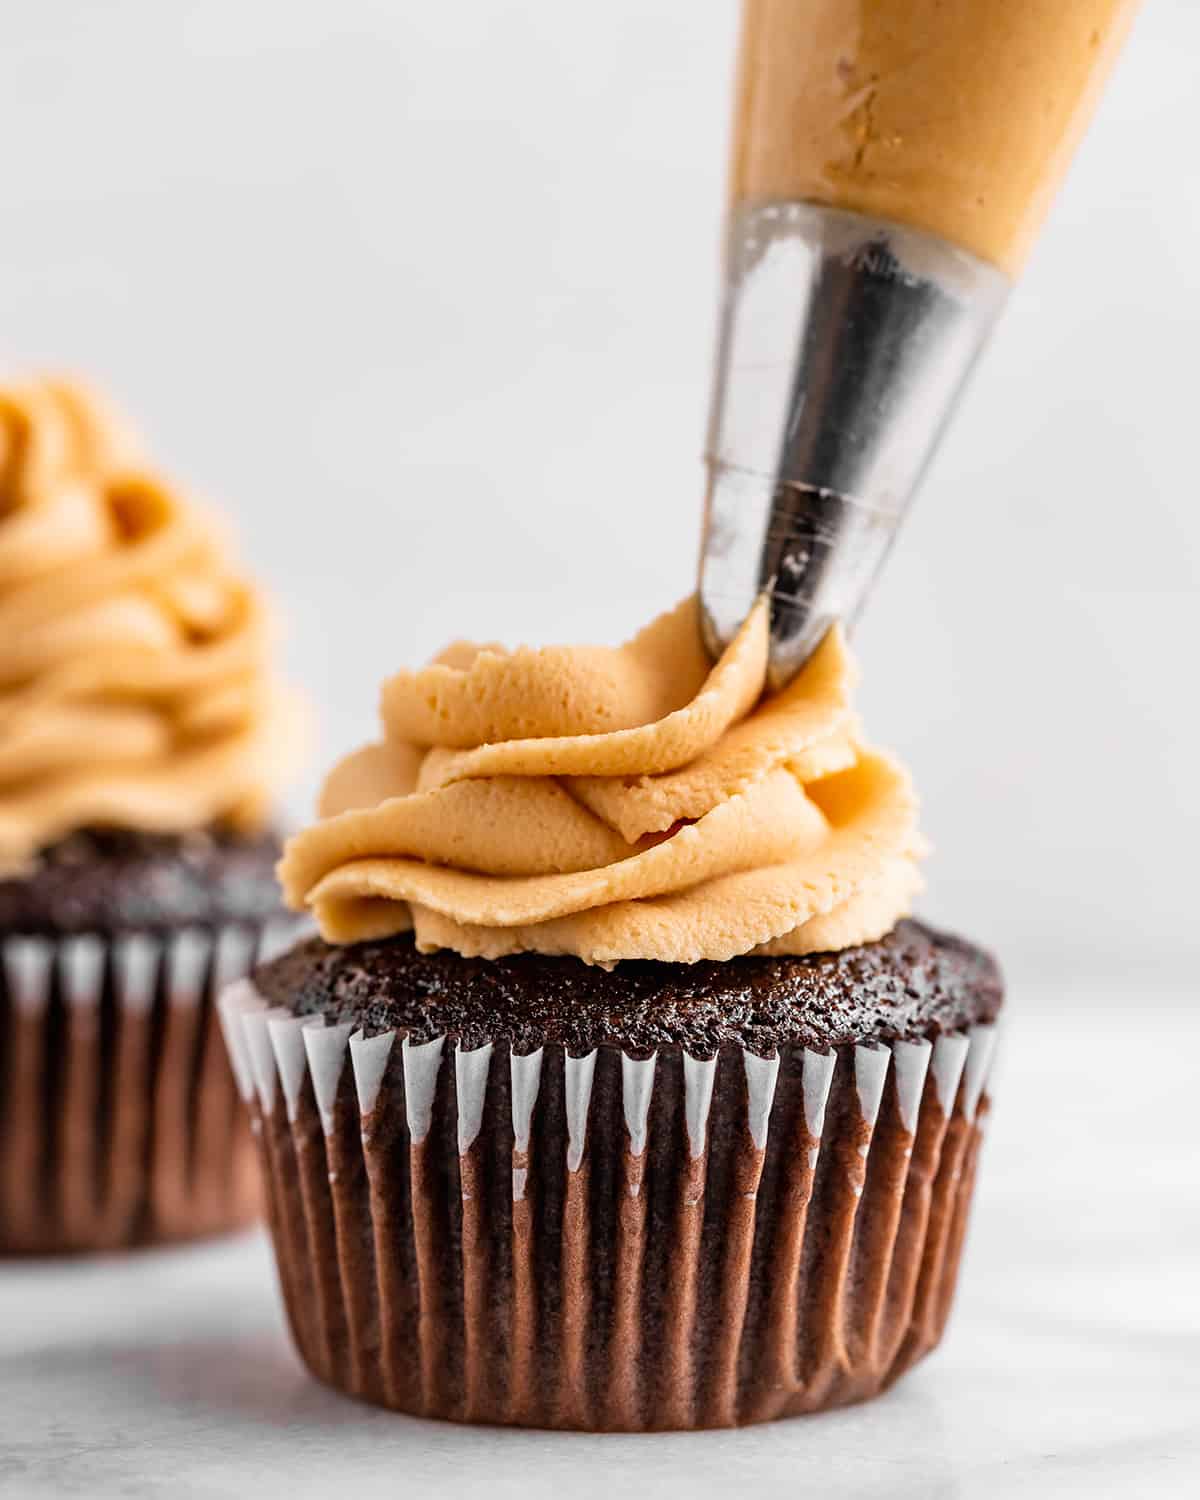 Peanut Butter Frosting being piped on top of a chocolate cupcake